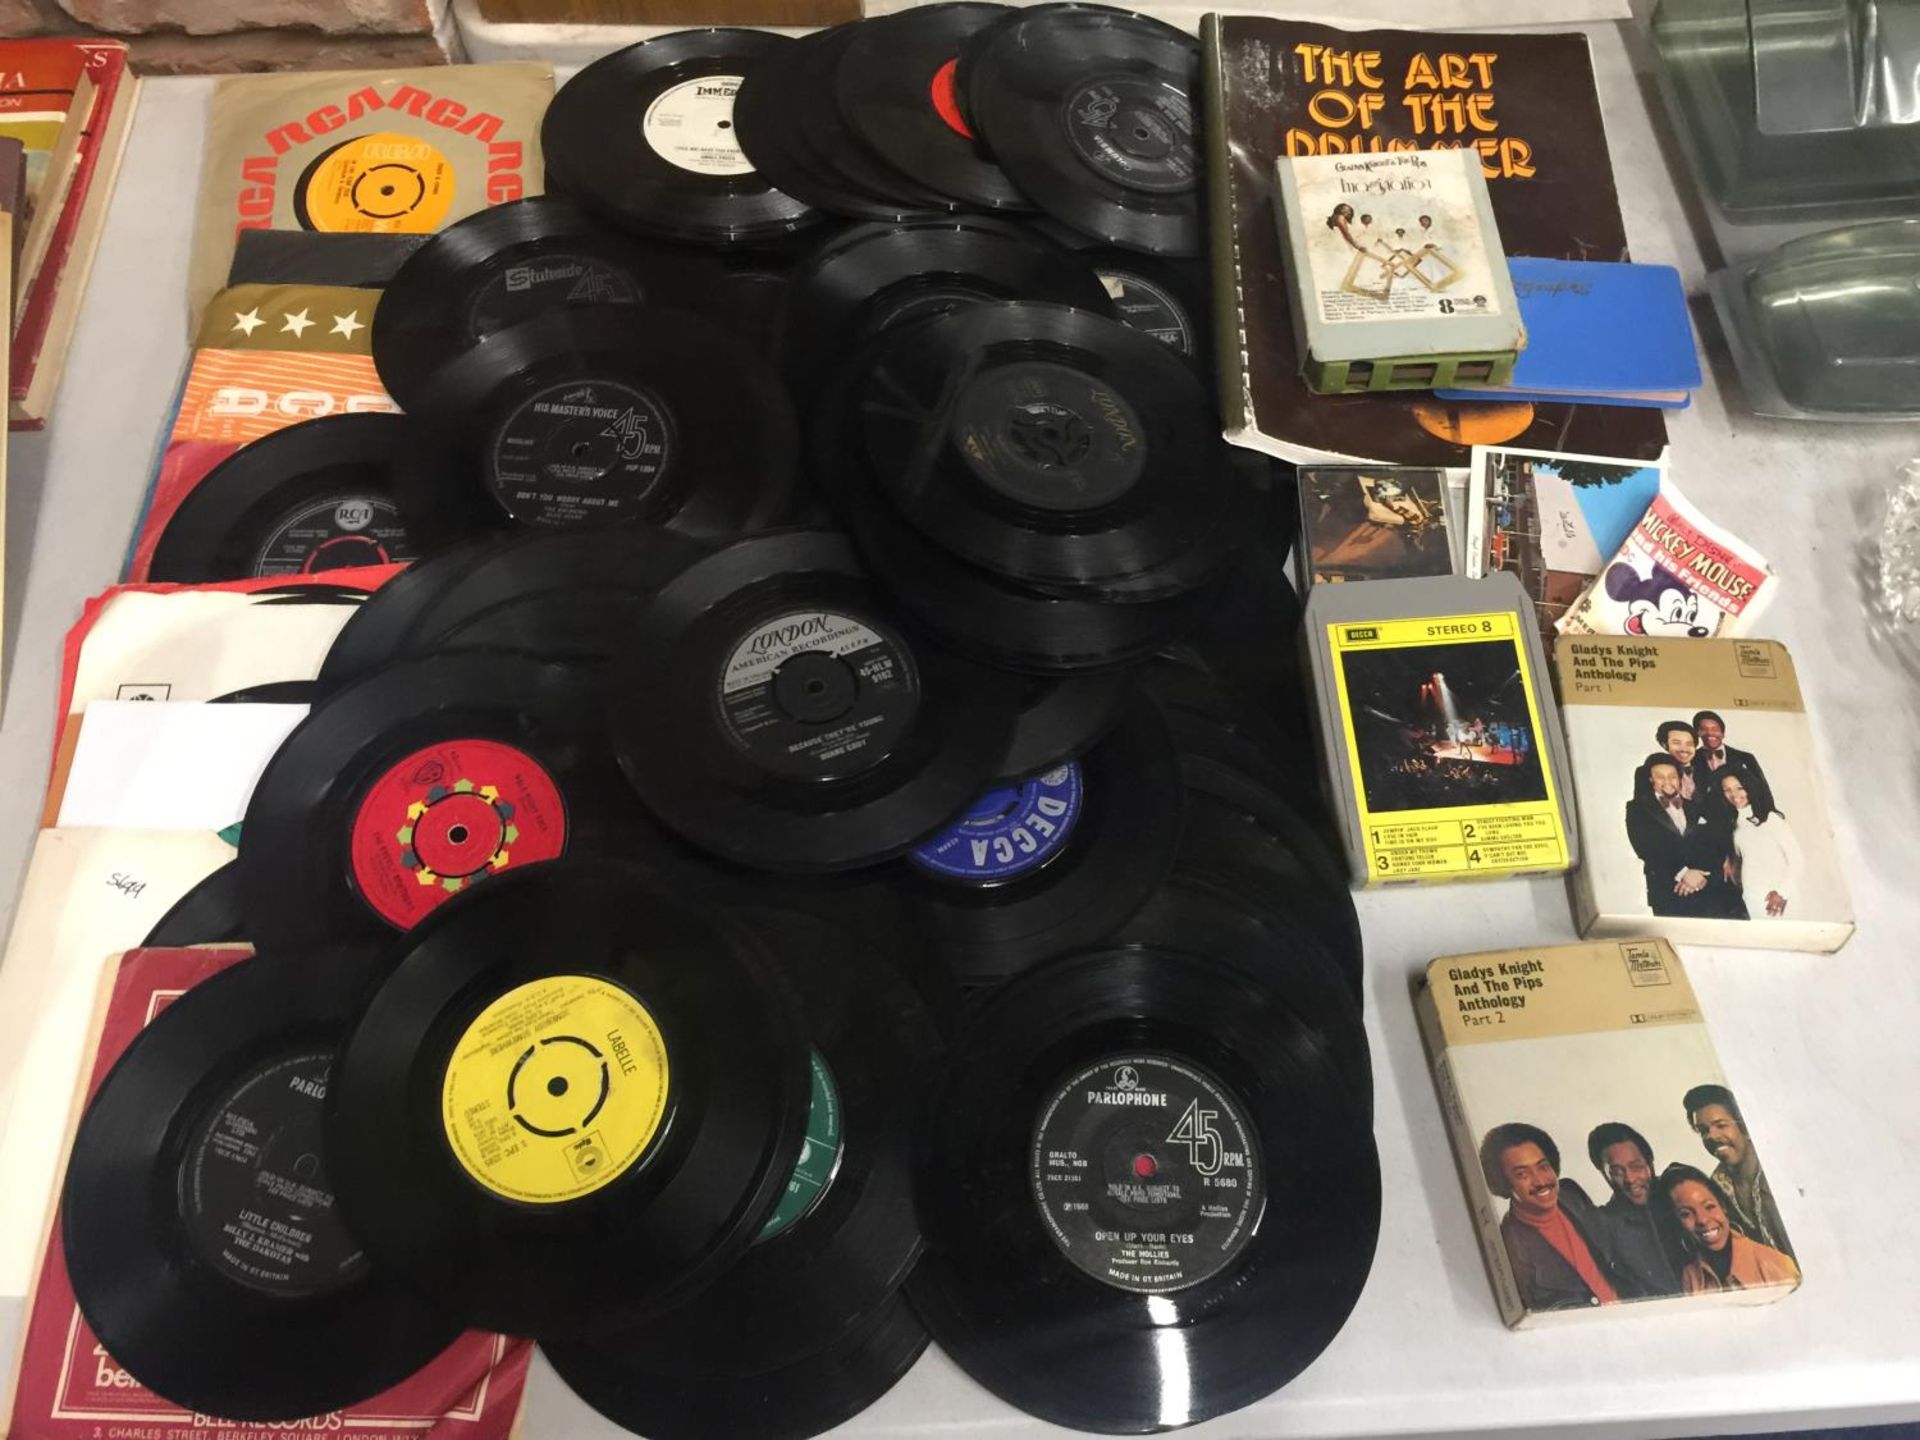 A LARGE COLLECTION OF VINTAGE VINYL SINGLE RECORDS TO INCLUDE THE HOLLIES, DUANE EDDY, THE EVERLY